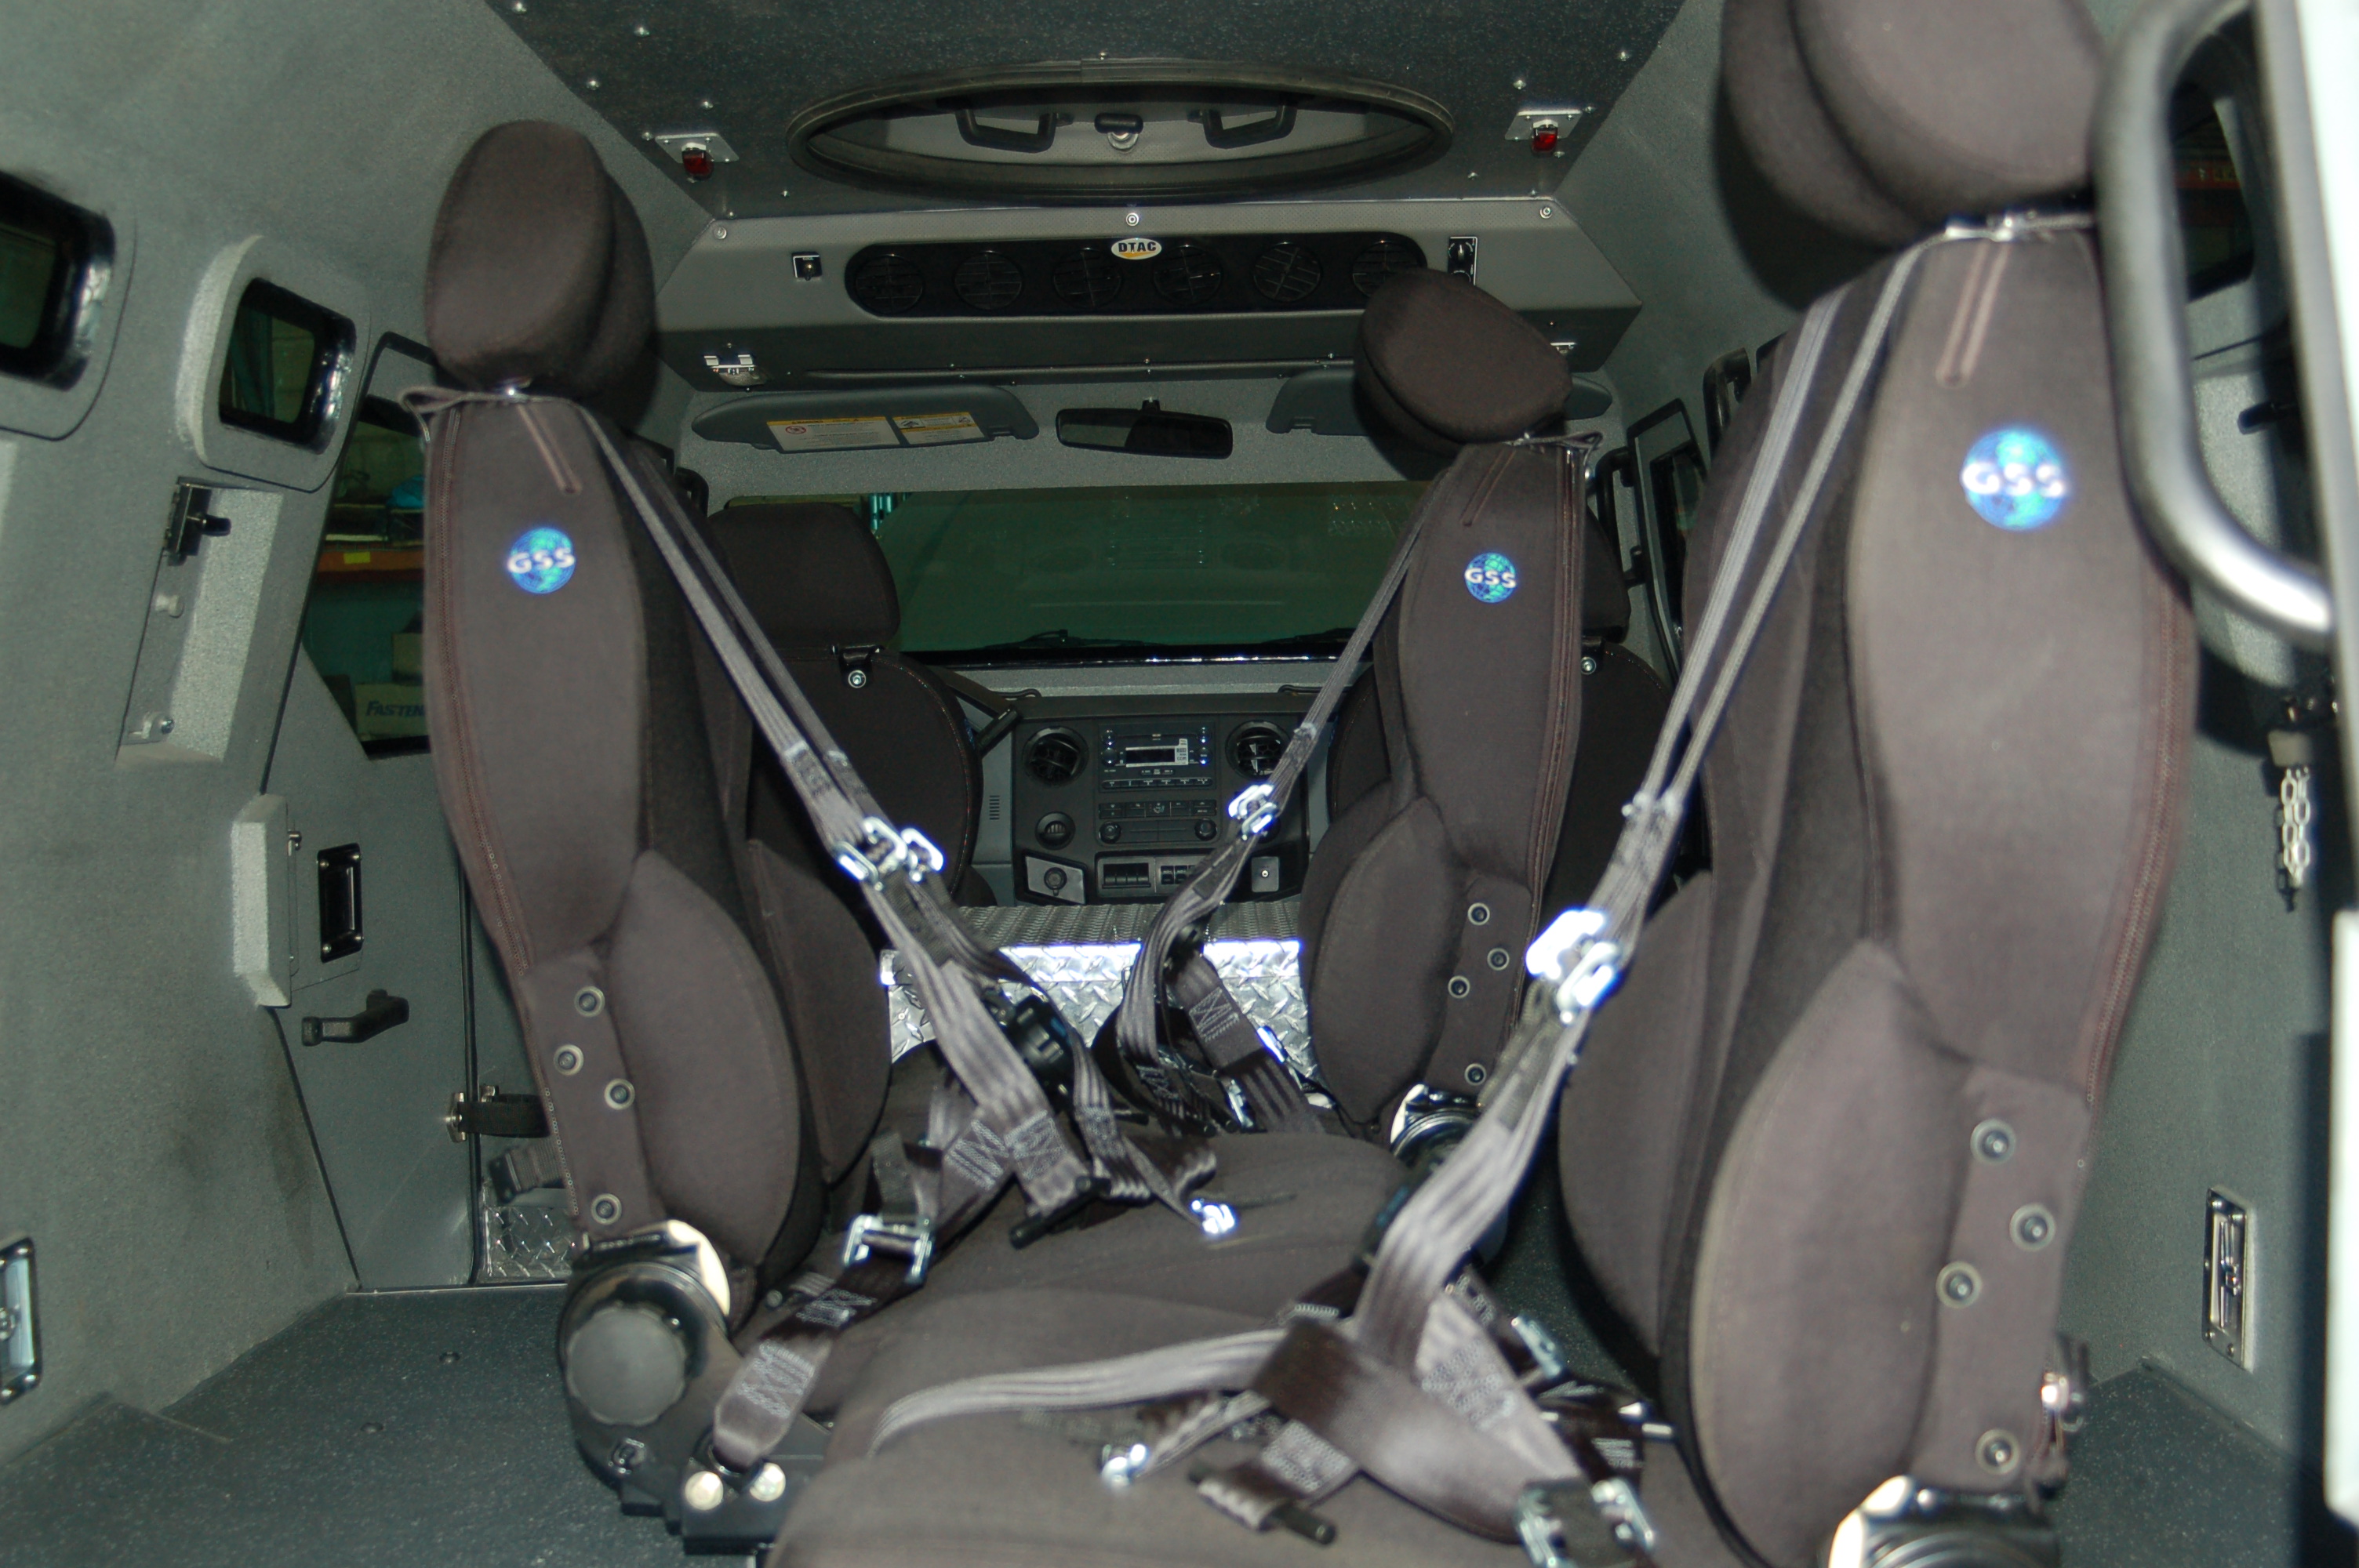 BLAST SEATS WITH INTERIOR TO A MILITARY STANDARD